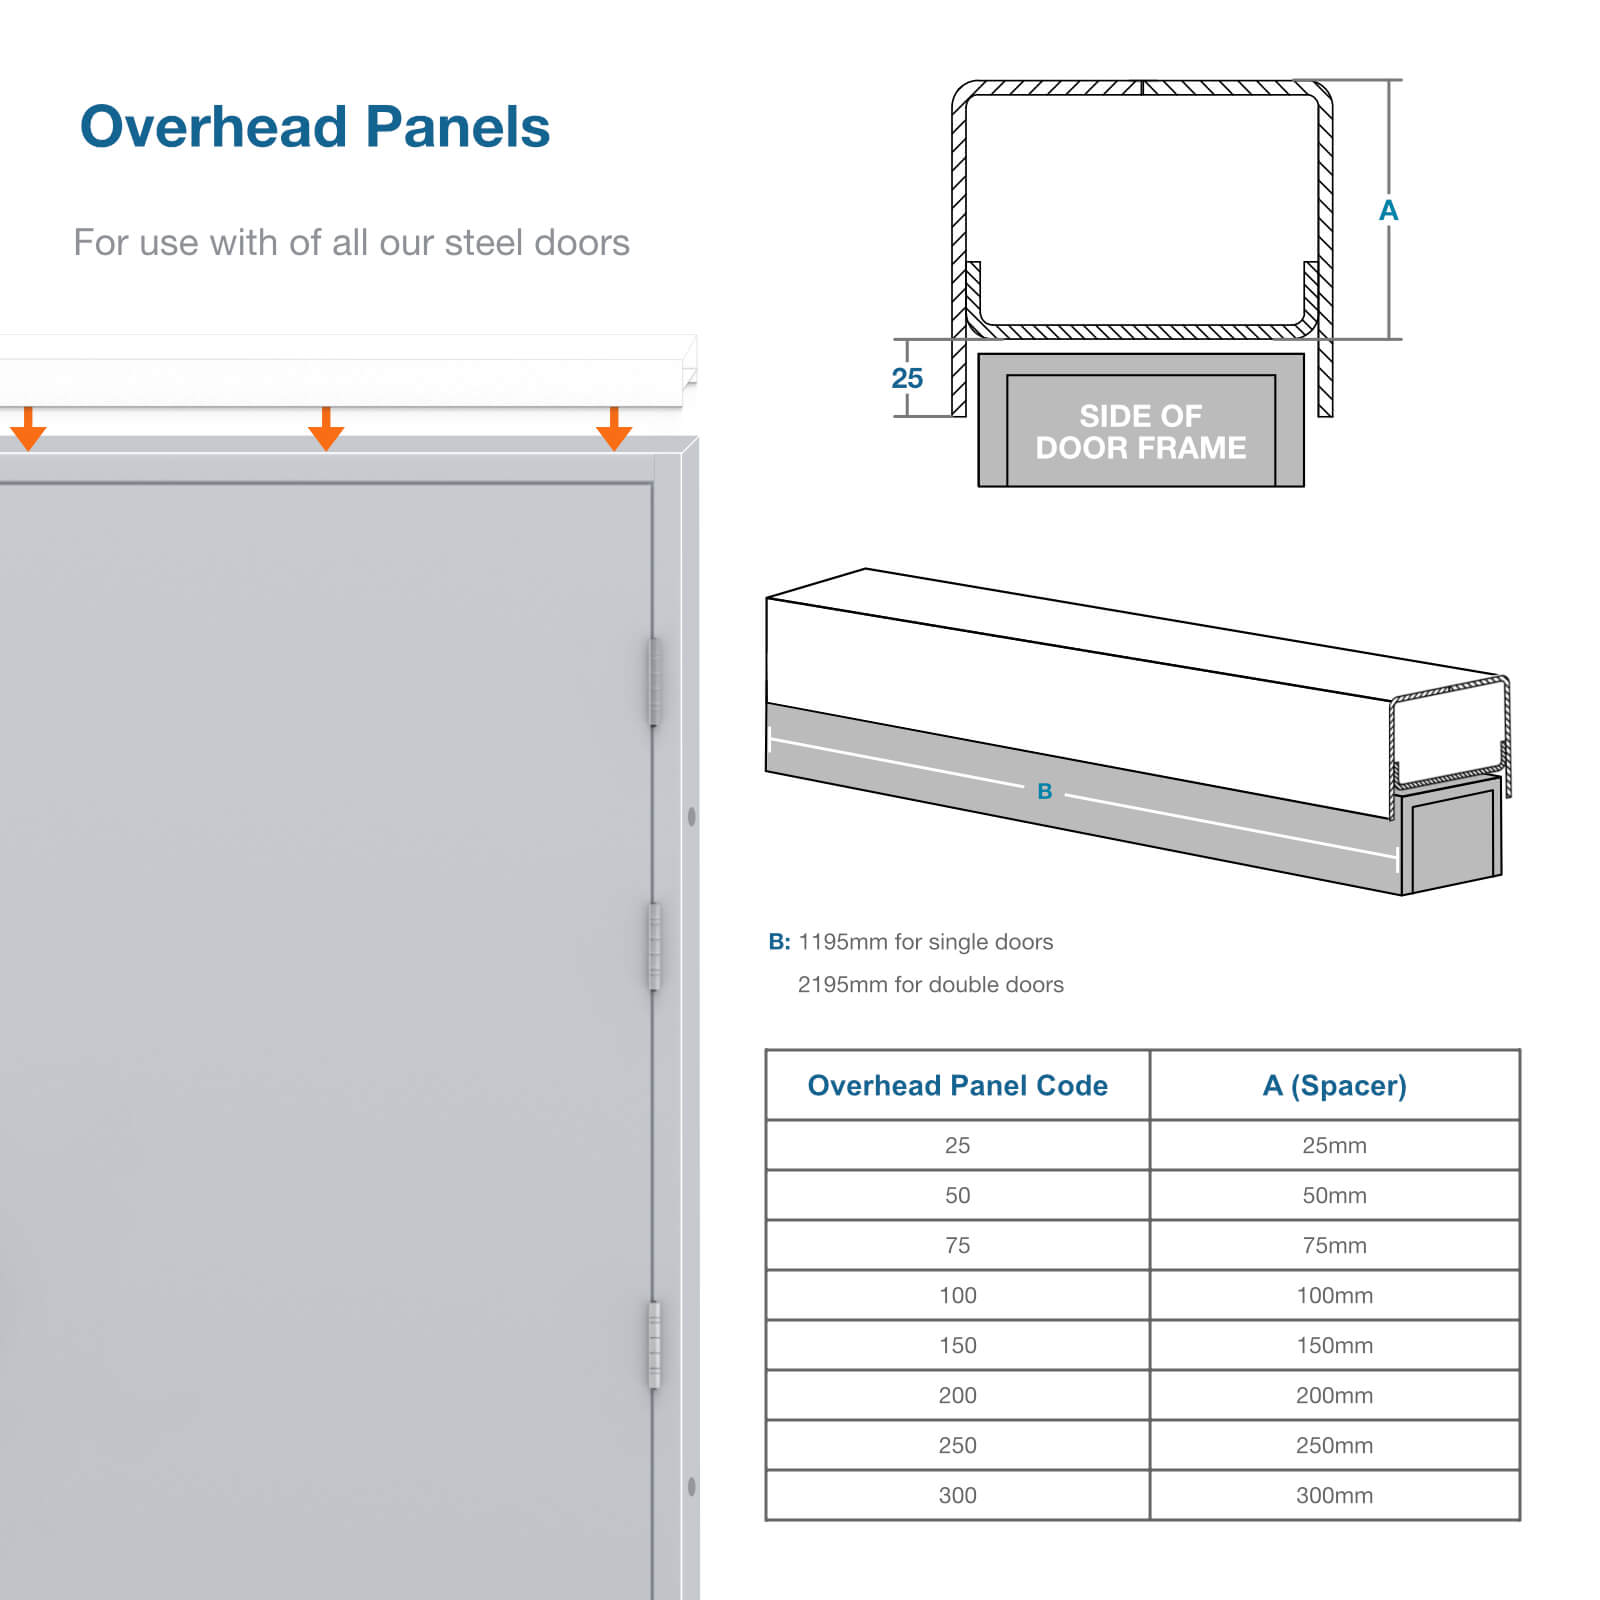 Dimensions and information about overhead panels for single doorsets